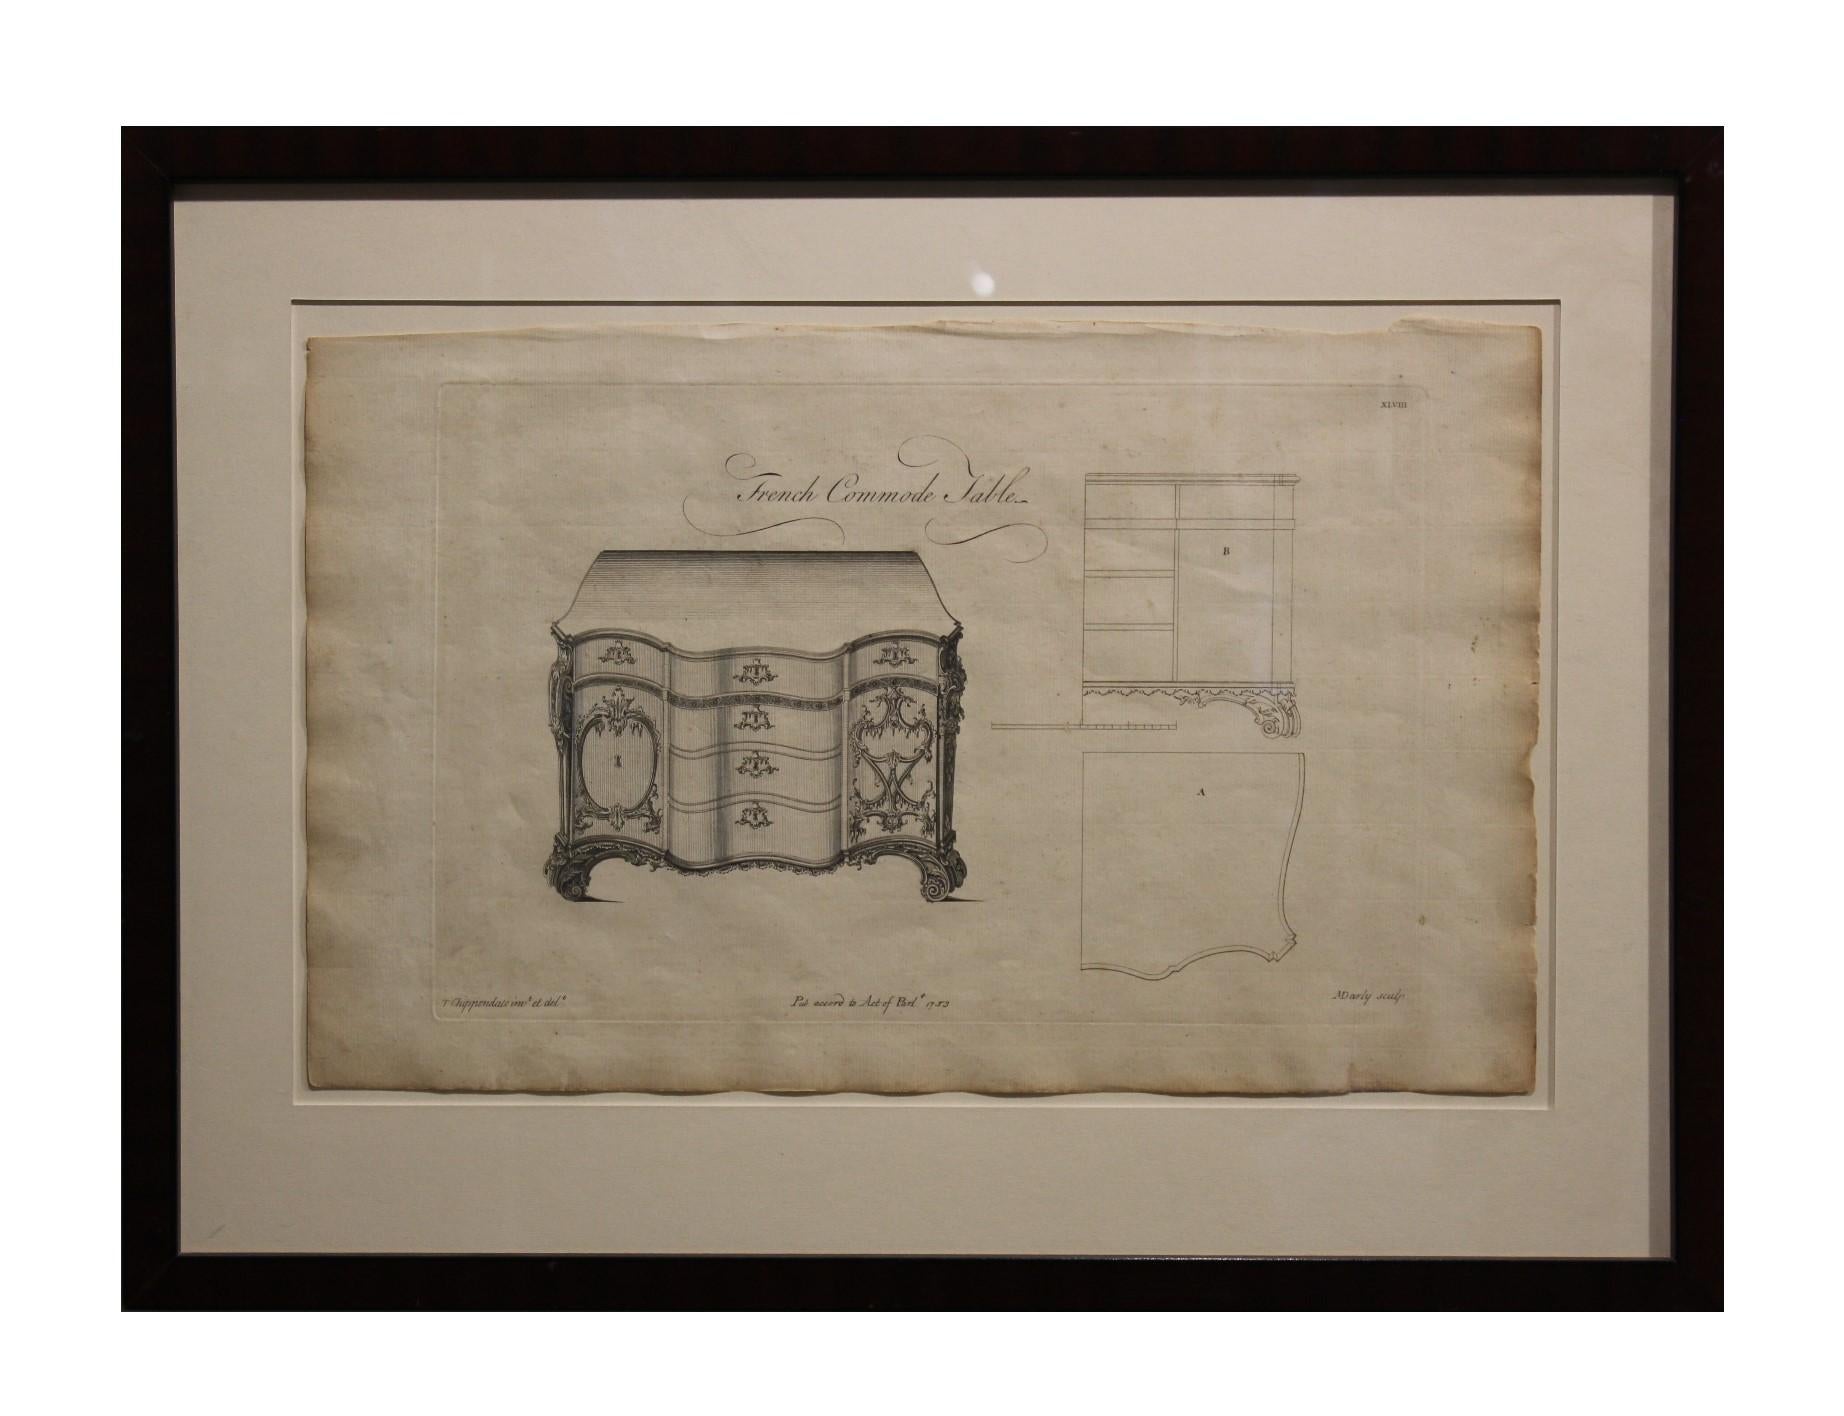 French Commode Table Etching From "The Gentleman and Cabinet-Maker's Director"